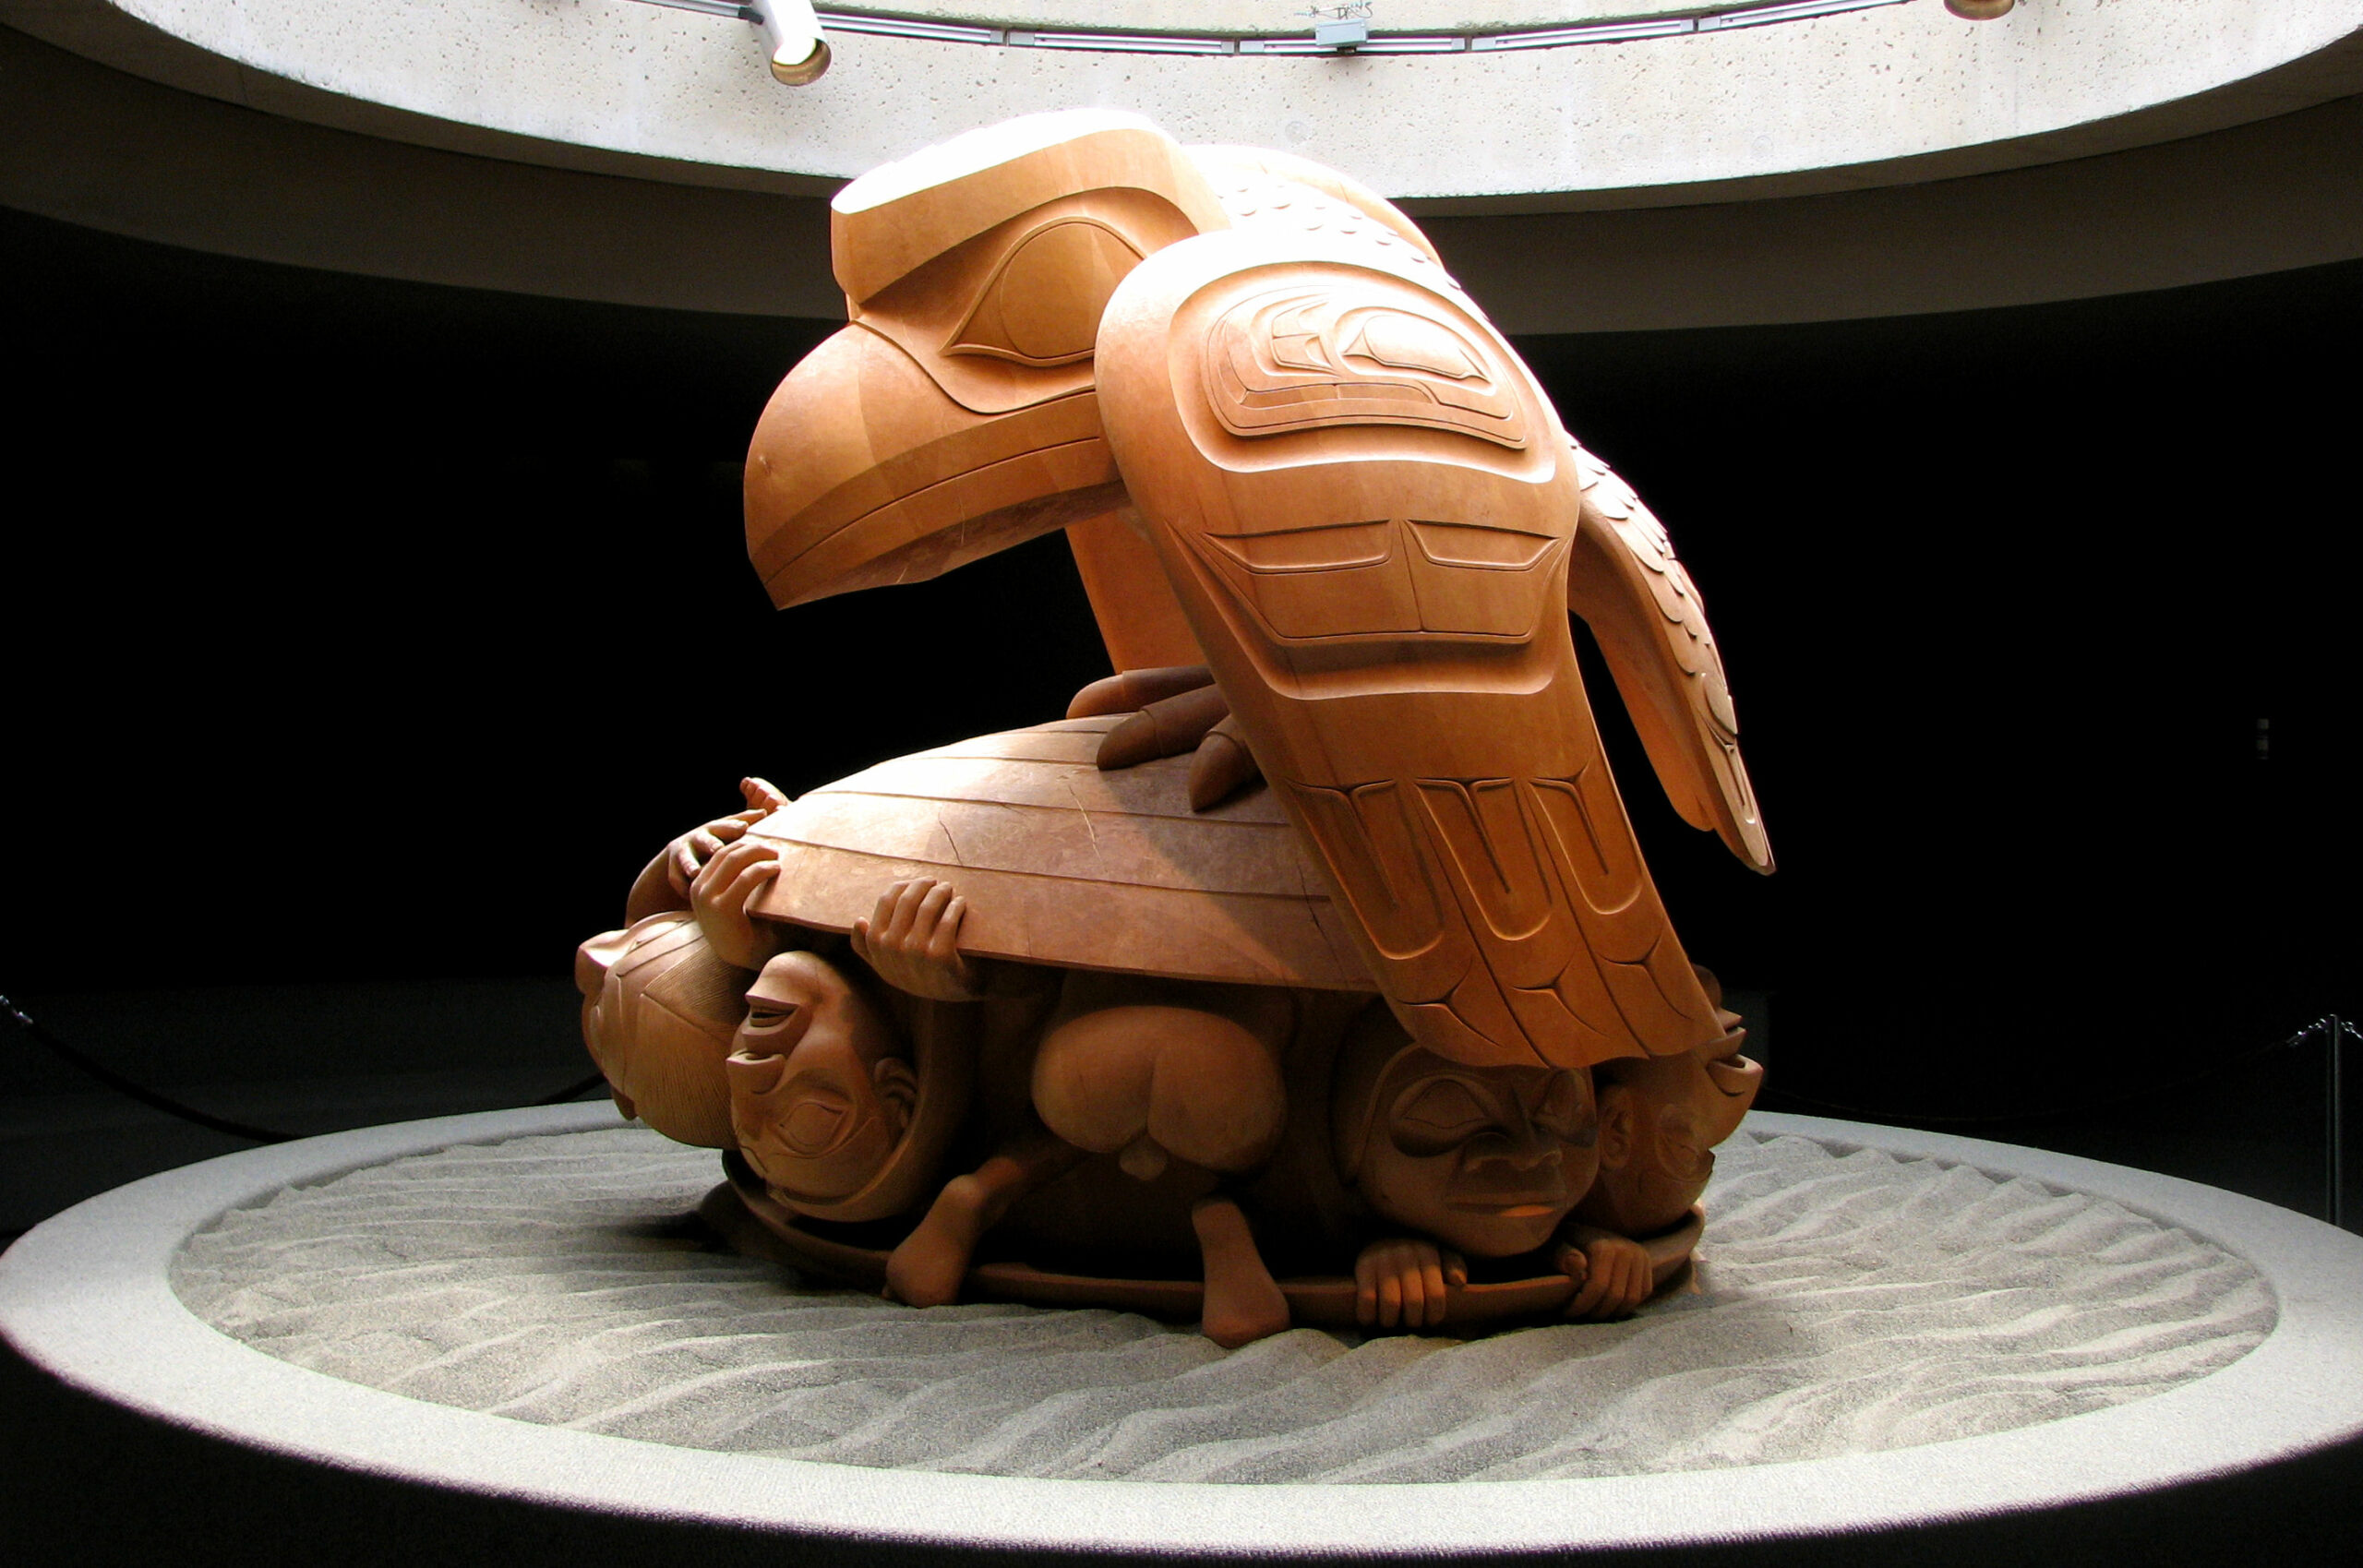 A piece of native artwork: a wood-carved figure of a raven perched atop a clam from which humans emerge.